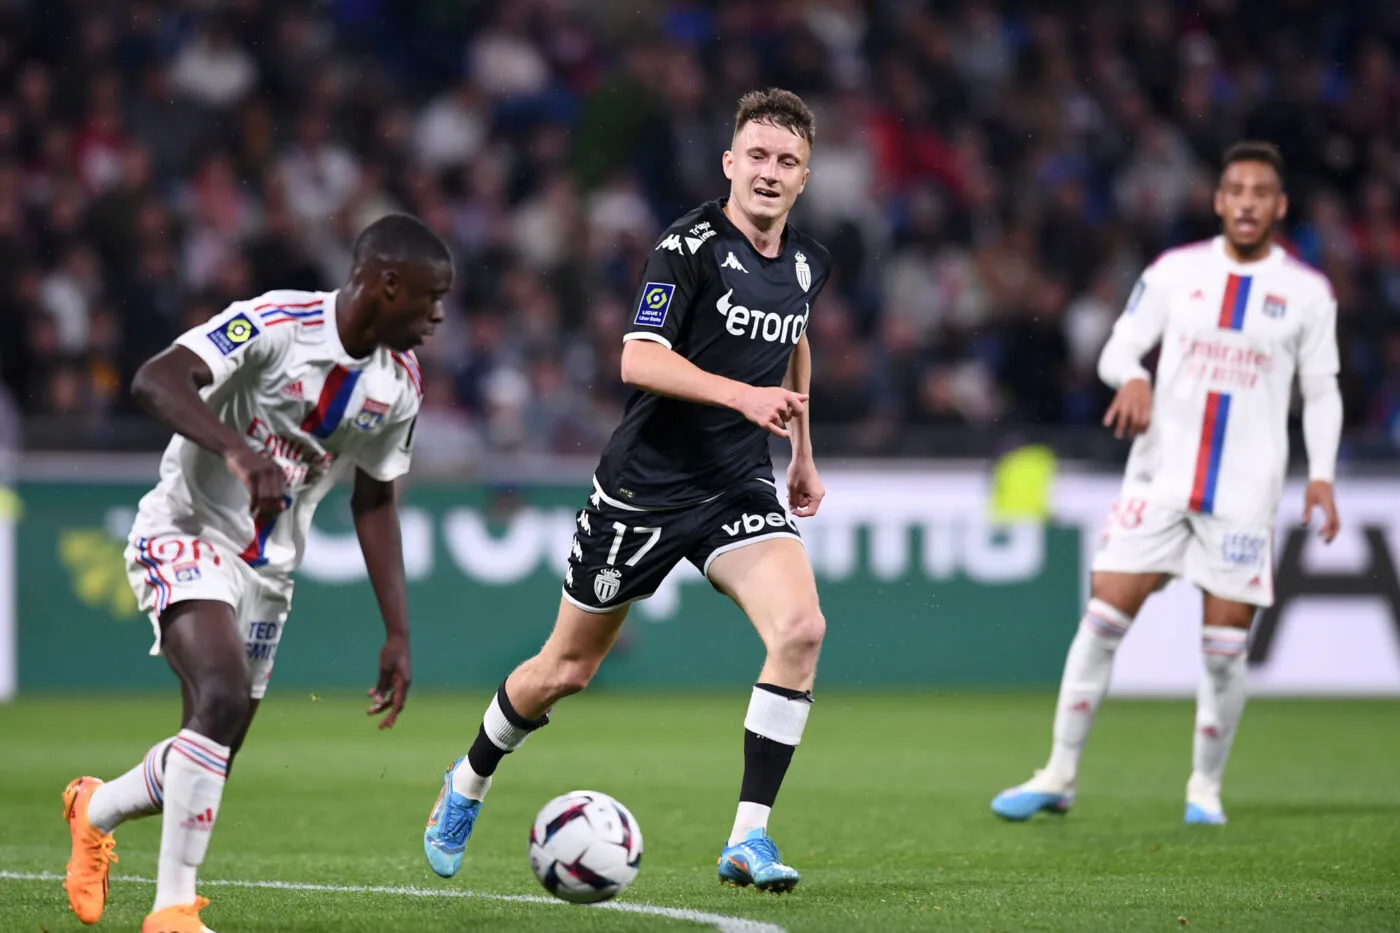 17 Aleksandr GOLOVIN (asm) during the Ligue 1 Uber Eats match between Lyon and Monaco May 19, 2023 at Groupama Stadium in Lyon, France. (Photo by Philippe Lecoeur/FEP/Icon Sport)